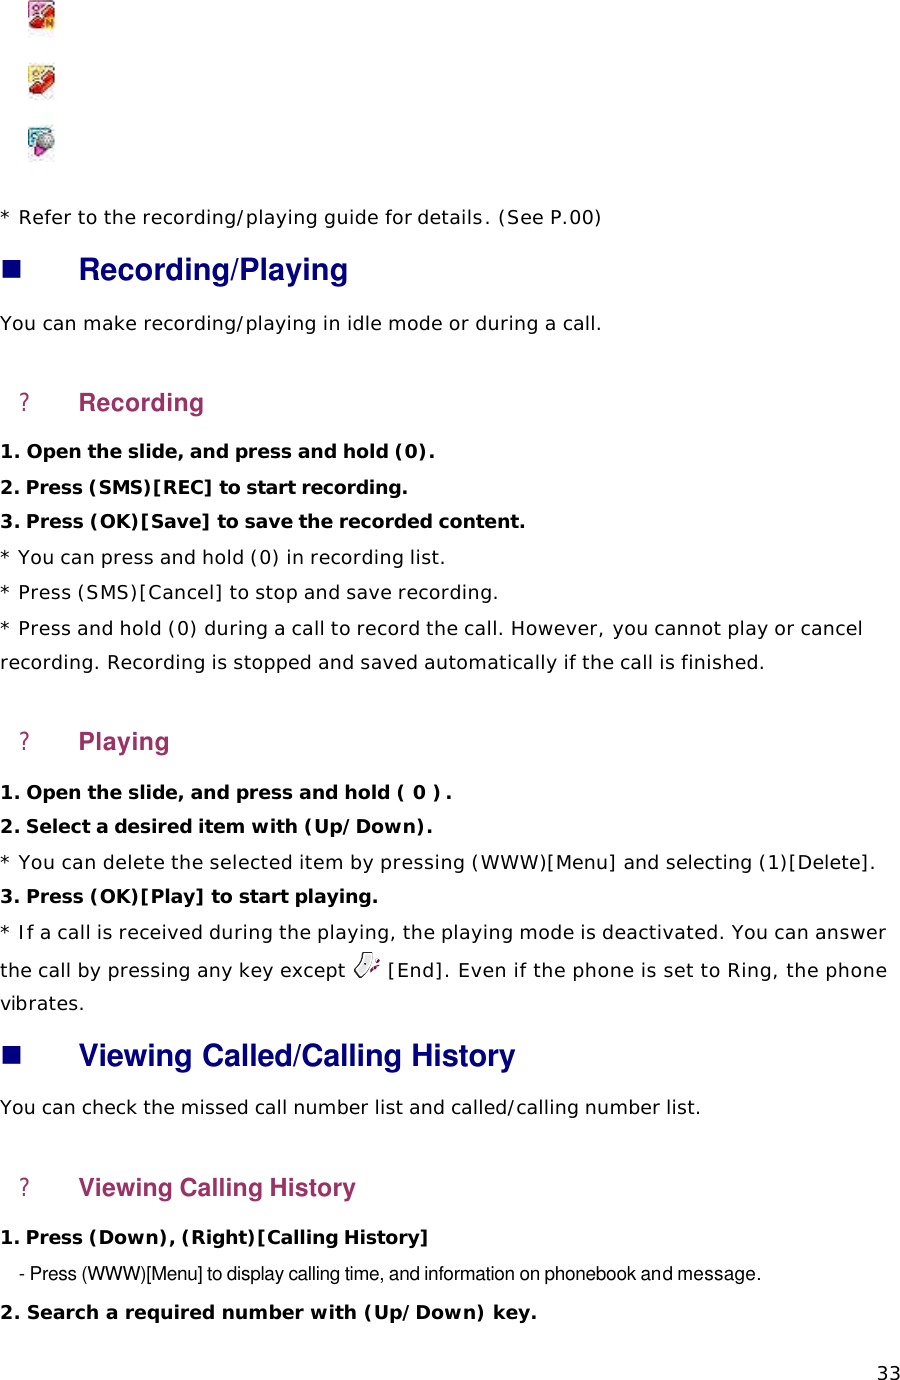   33    * Refer to the recording/playing guide for details. (See P.00) n Recording/Playing   You can make recording/playing in idle mode or during a call. ? Recording 1. Open the slide, and press and hold (0).  2. Press (SMS)[REC] to start recording. 3. Press (OK)[Save] to save the recorded content.  * You can press and hold (0) in recording list. * Press (SMS)[Cancel] to stop and save recording. * Press and hold (0) during a call to record the call. However, you cannot play or cancel recording. Recording is stopped and saved automatically if the call is finished.  ? Playing 1. Open the slide, and press and hold ( 0 ) .  2. Select a desired item with (Up/Down). * You can delete the selected item by pressing (WWW)[Menu] and selecting (1)[Delete]. 3. Press (OK)[Play] to start playing. * If a call is received during the playing, the playing mode is deactivated. You can answer the call by pressing any key except   [End]. Even if the phone is set to Ring, the phone vibrates.  n Viewing Called/Calling History You can check the missed call number list and called/calling number list.   ? Viewing Calling History 1. Press (Down), (Right)[Calling History] - Press (WWW)[Menu] to display calling time, and information on phonebook and message.   2. Search a required number with (Up/Down) key.   